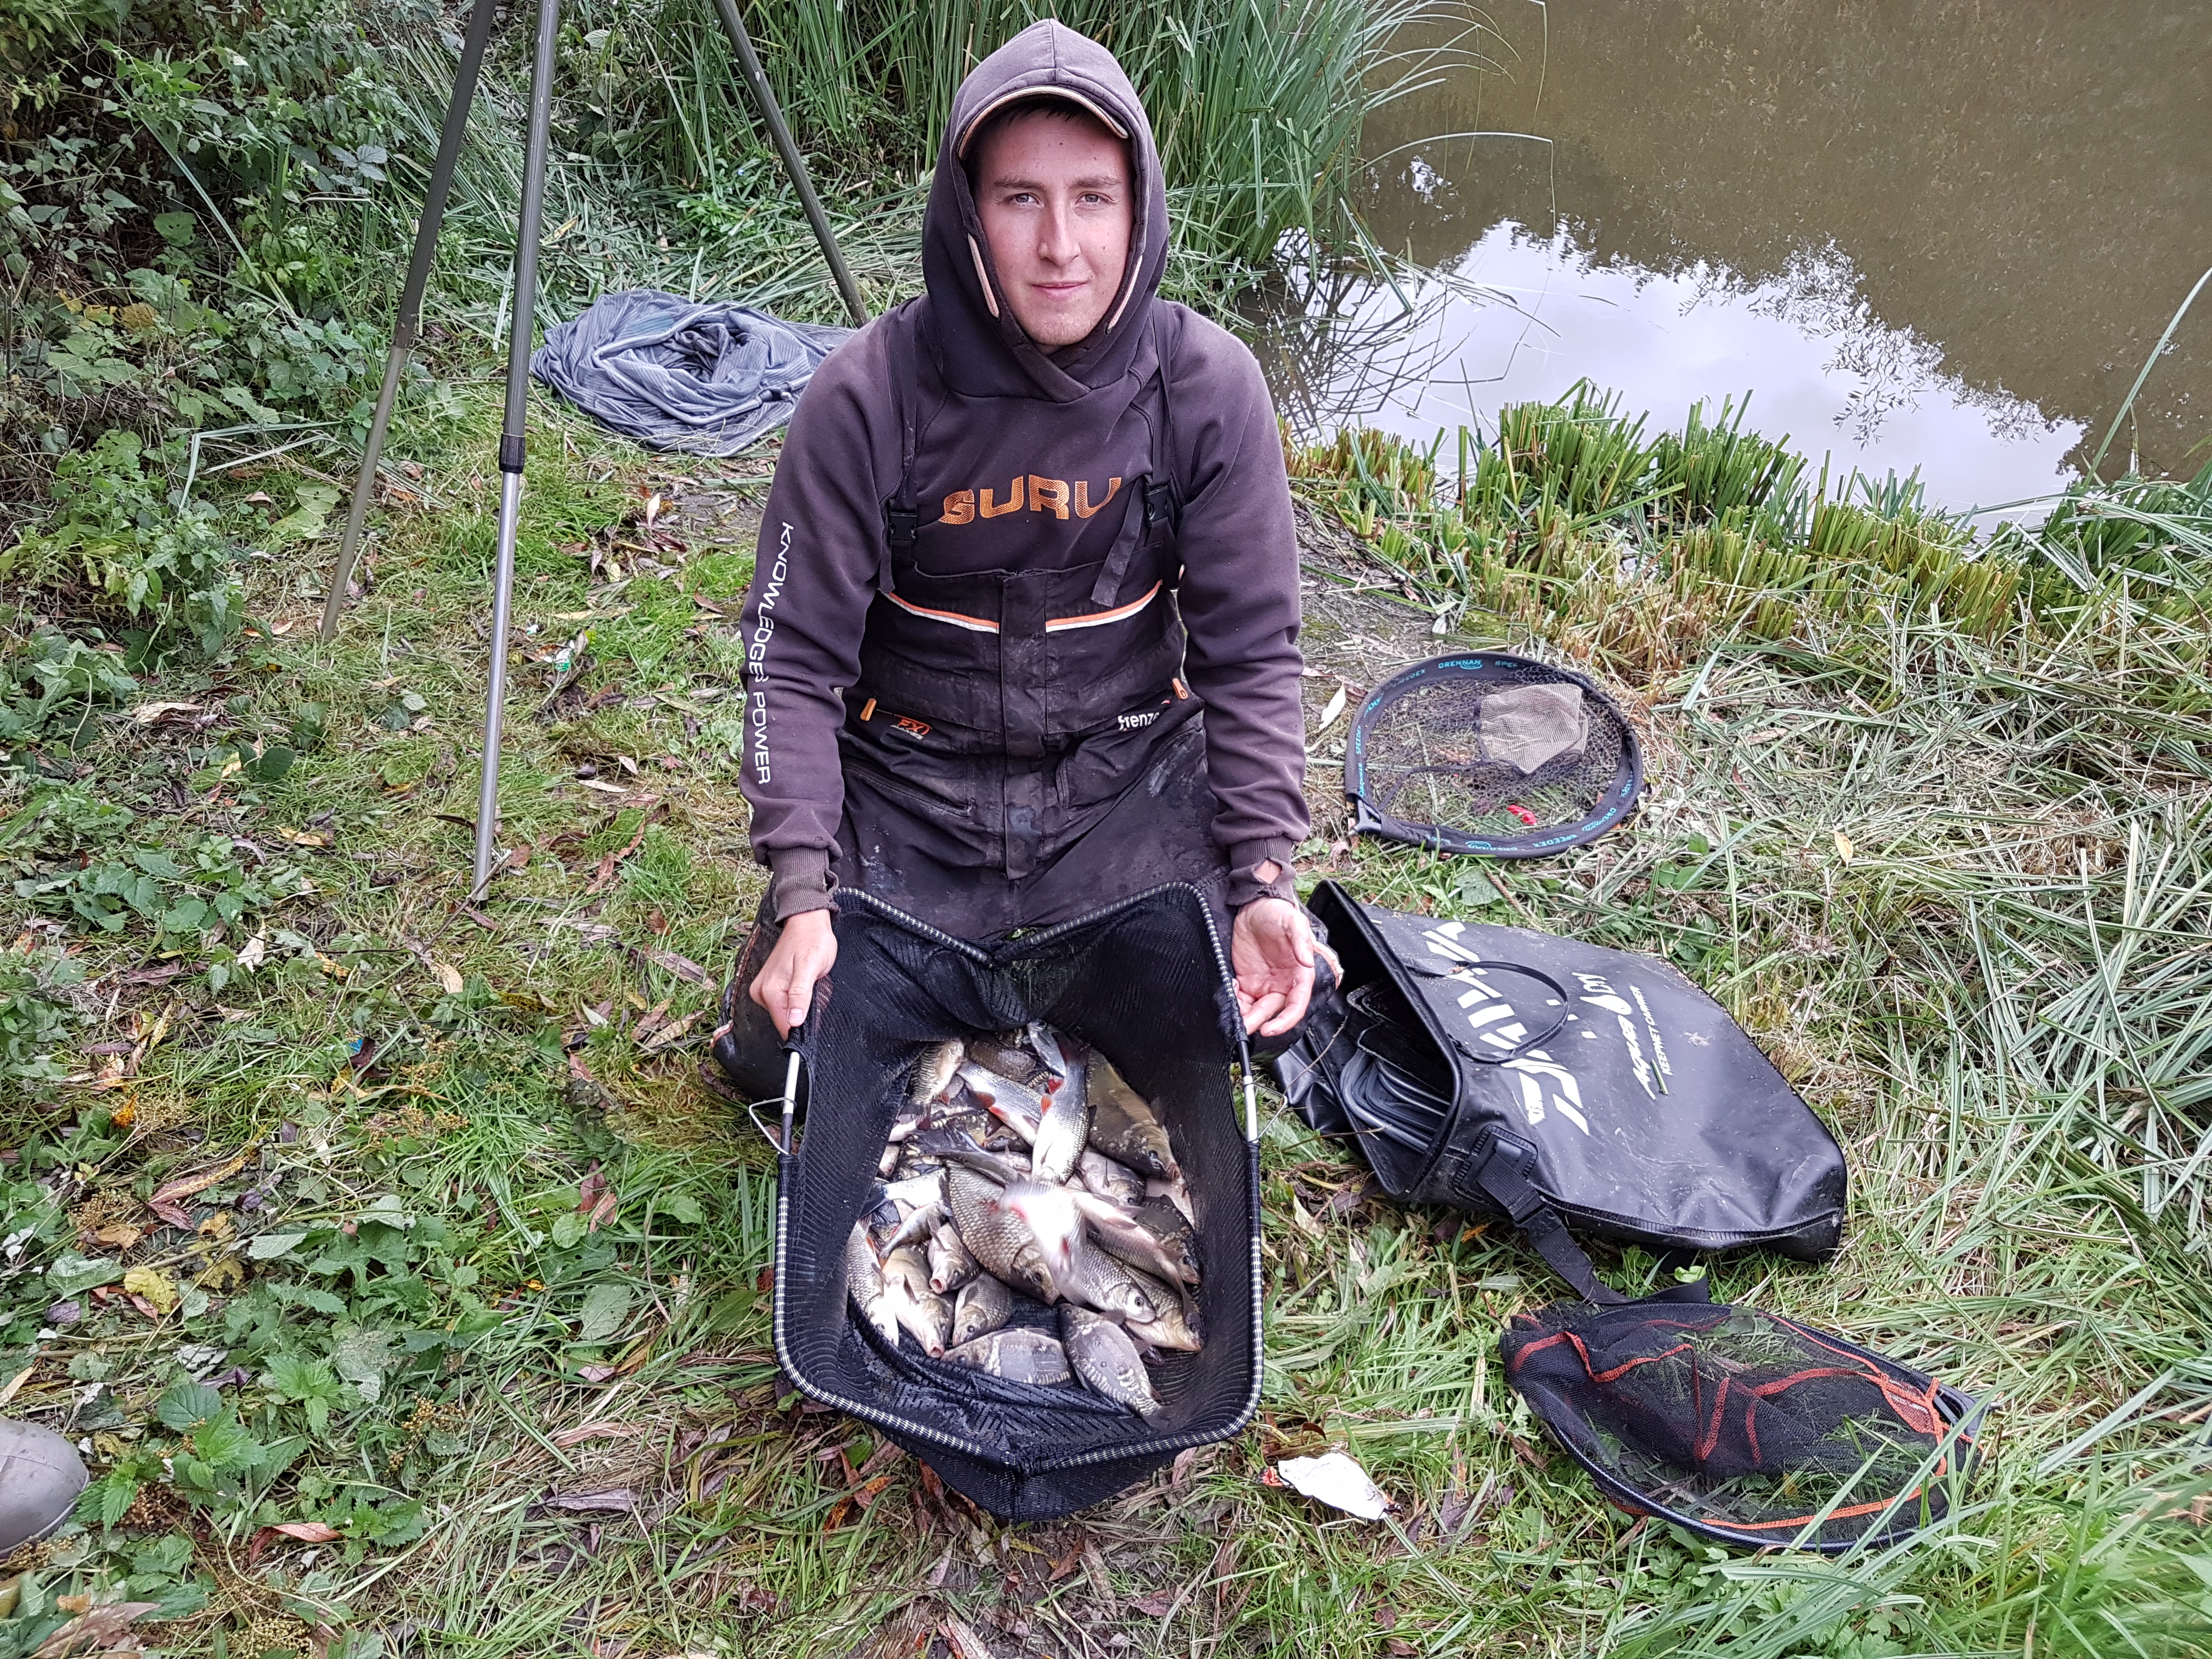 Mixed net - Carp and Silvers